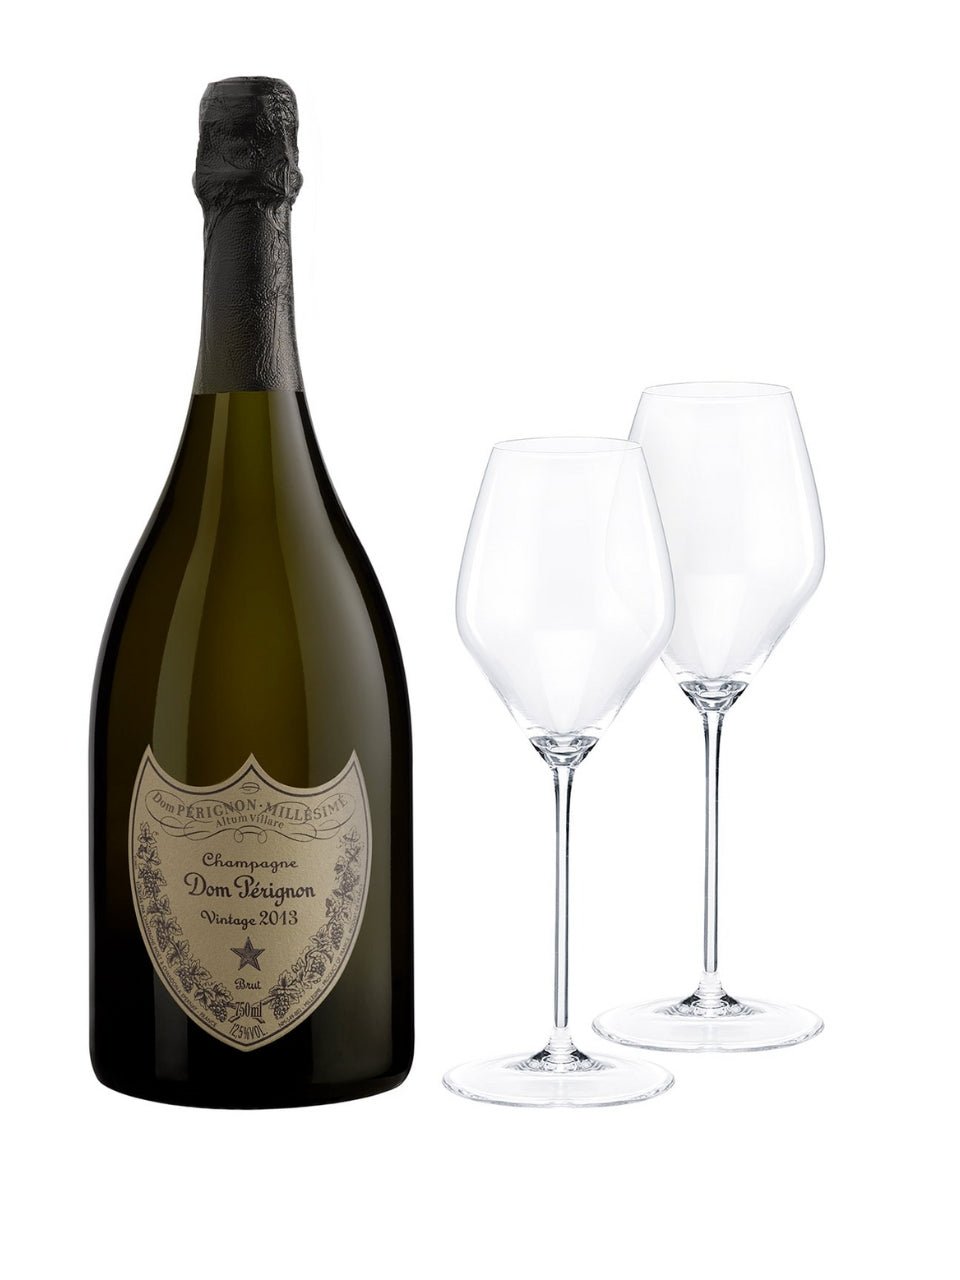 Dom Pérignon 2013 Vintage Celebration Duo with Riedel Crystal Glasses | Exquisite Wine & Alcohol Gift Delivery Toronto Canada | Vyno